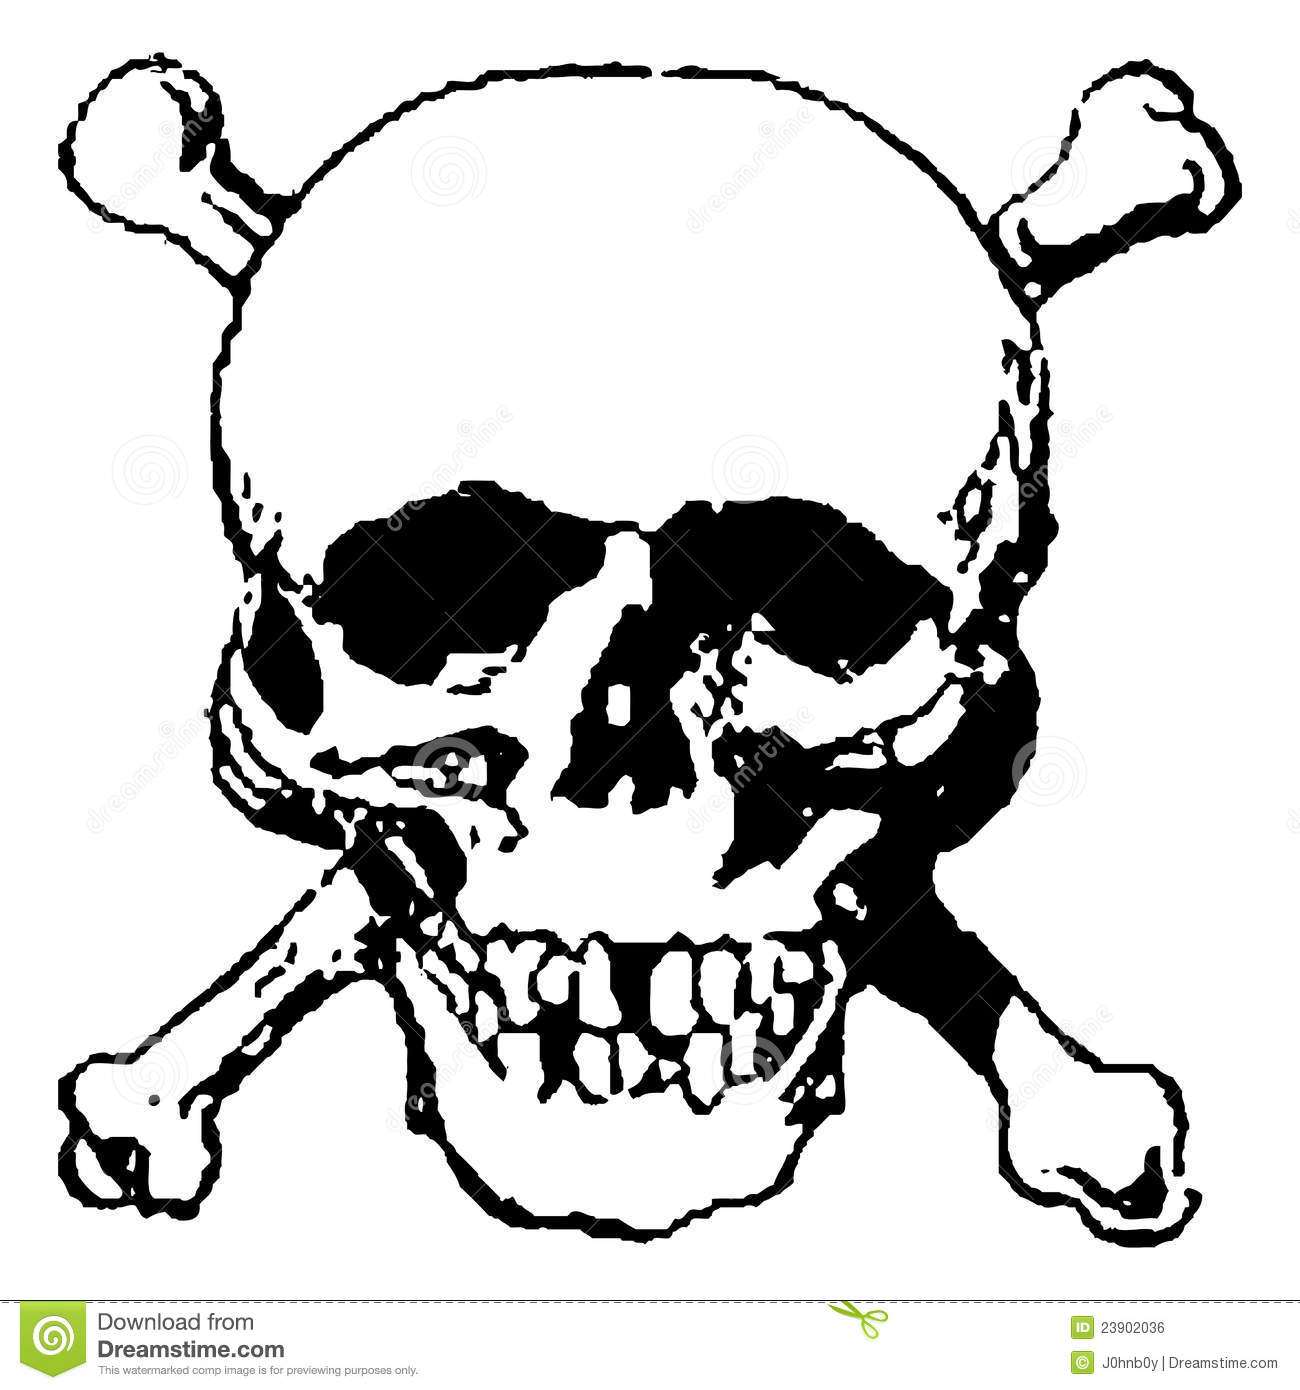 Black And White Computer Generated Skull And Crossbones